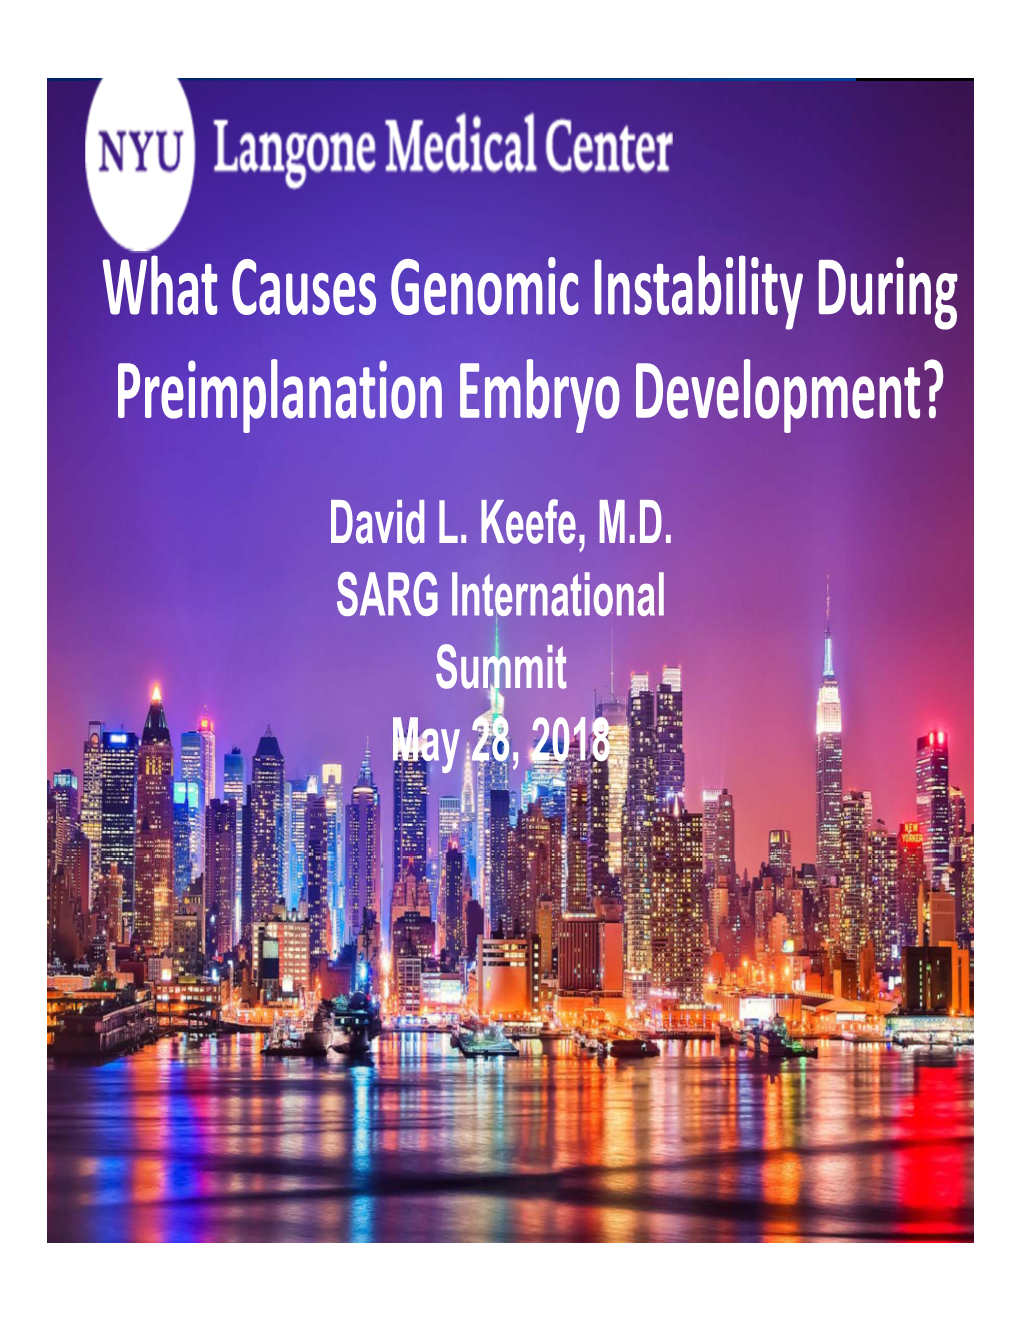 What Causes Genomic Instability During Preimplanation Embryo Development? David L